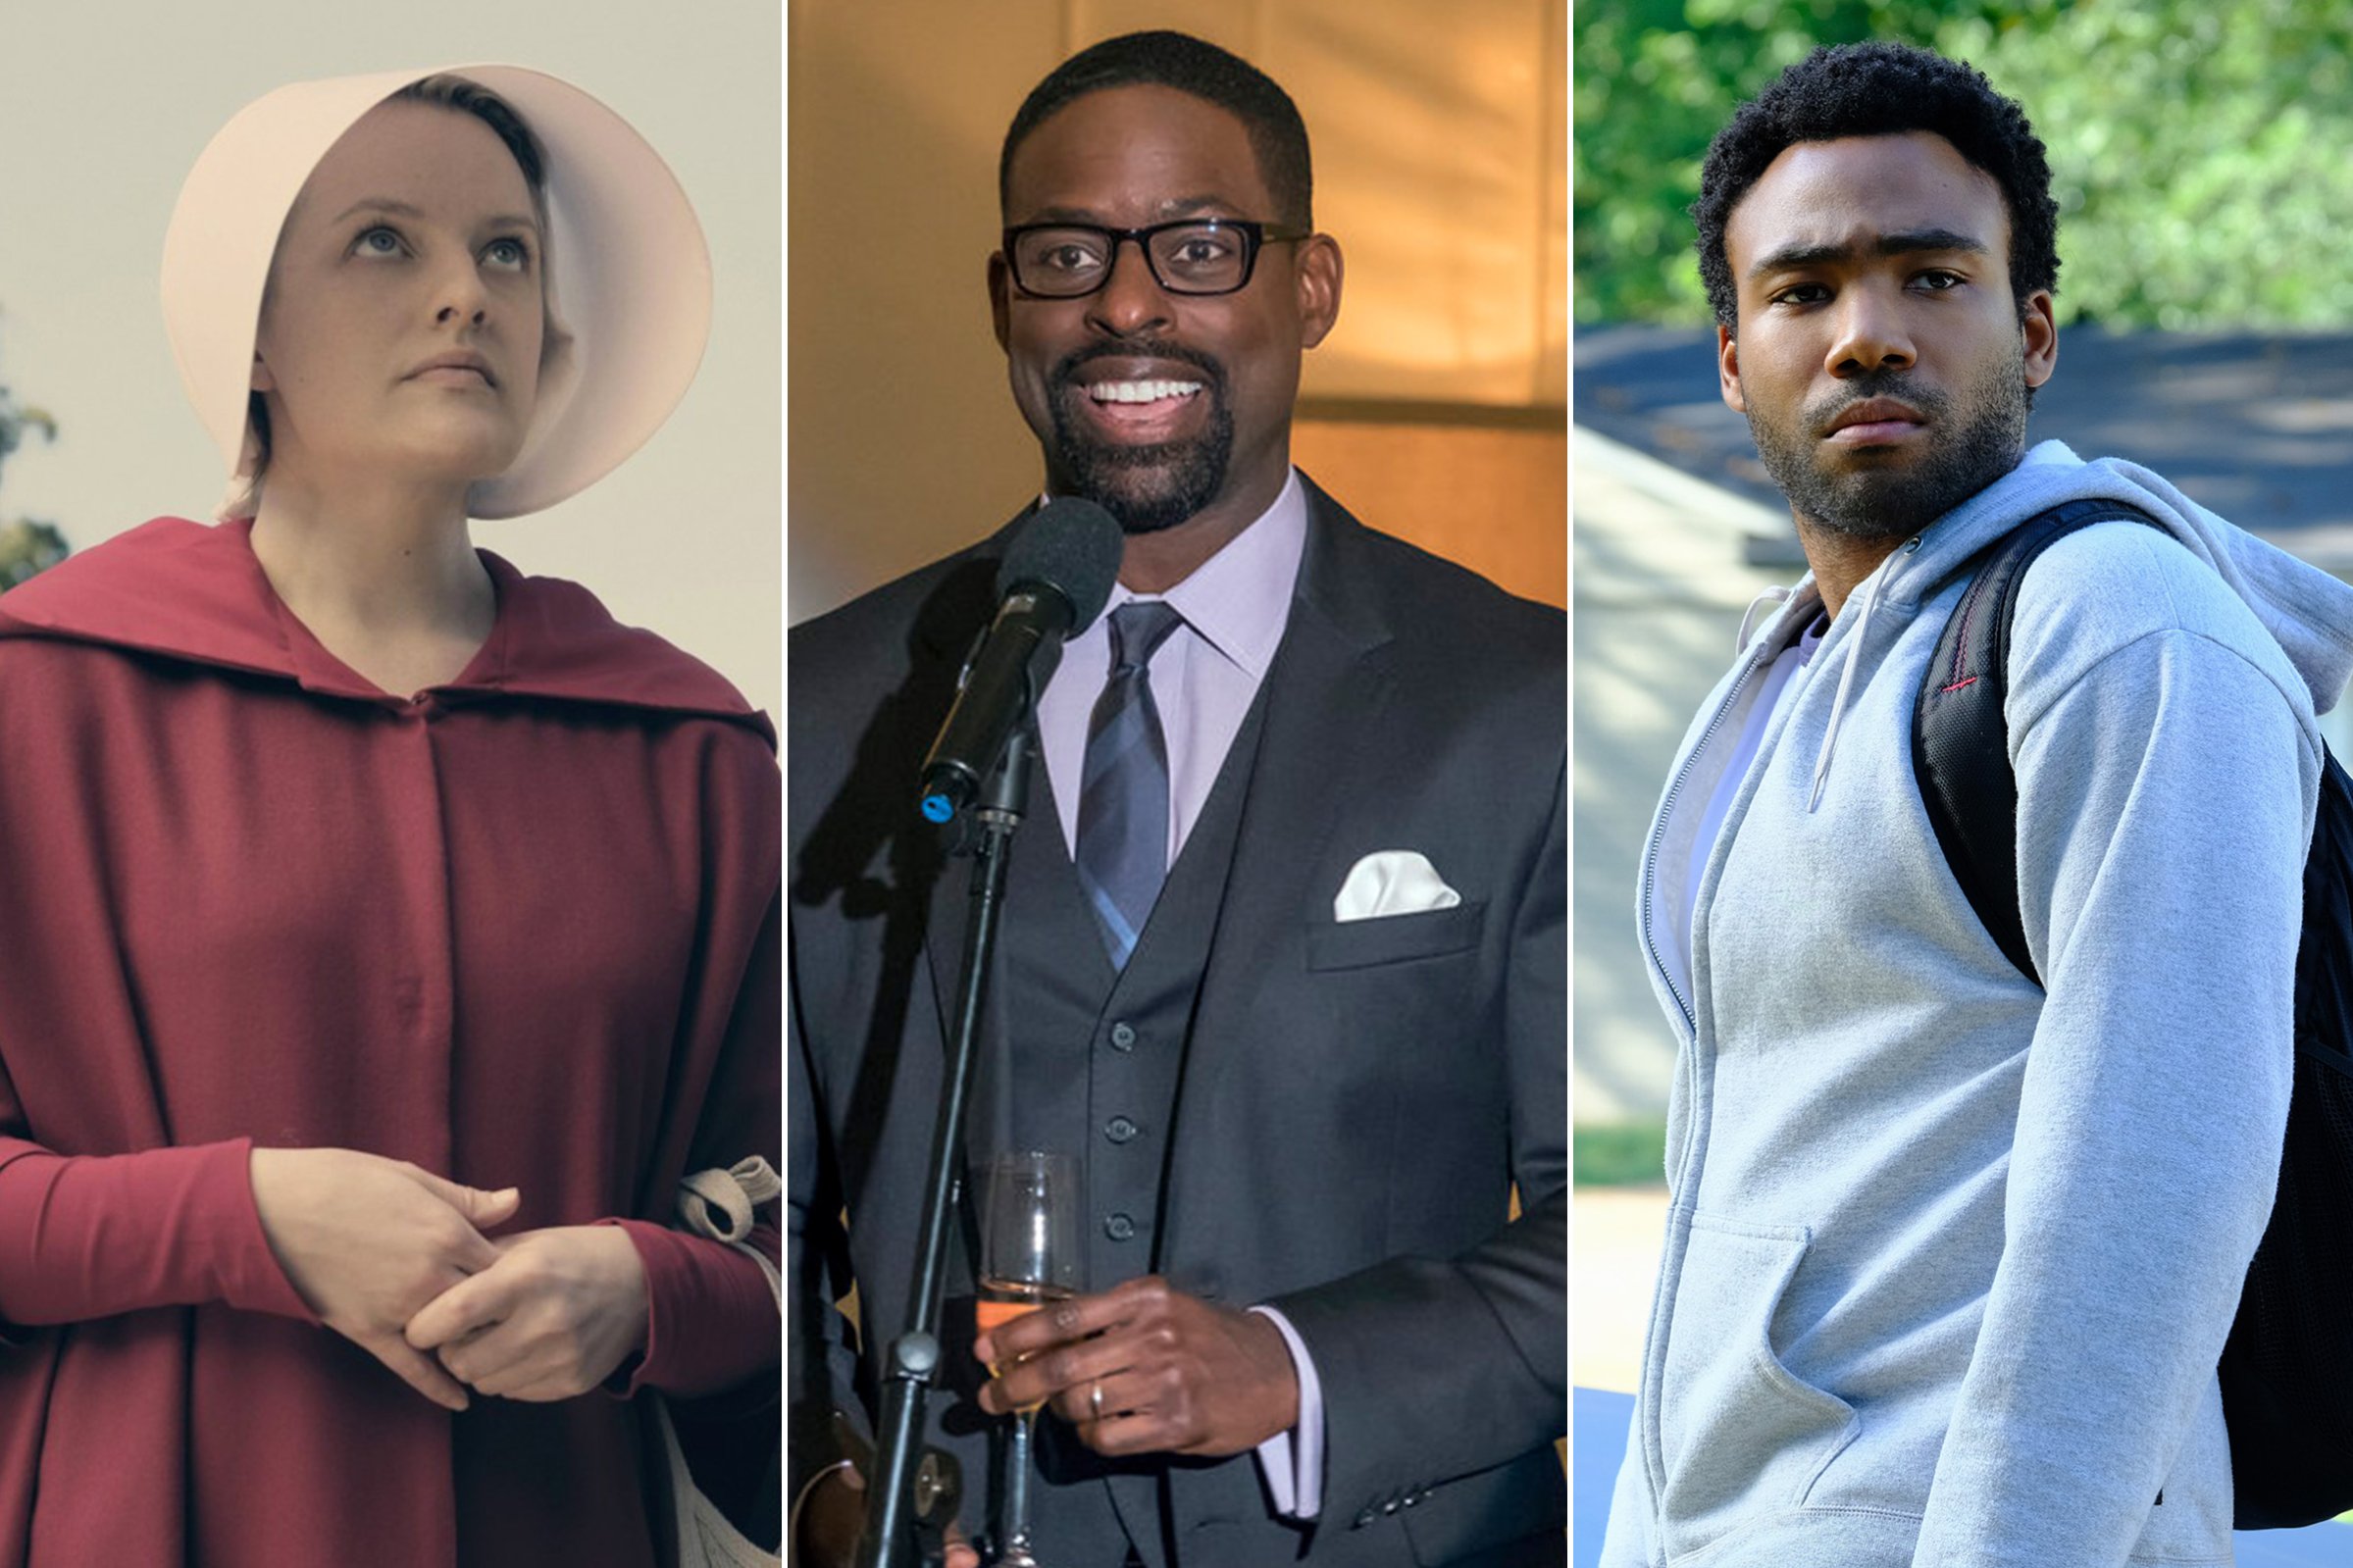 Elisabeth Moss in 'The Handmaid's Tale'; Sterling K. Brown in 'This is Us'; Donald Glover in 'Atlanta'